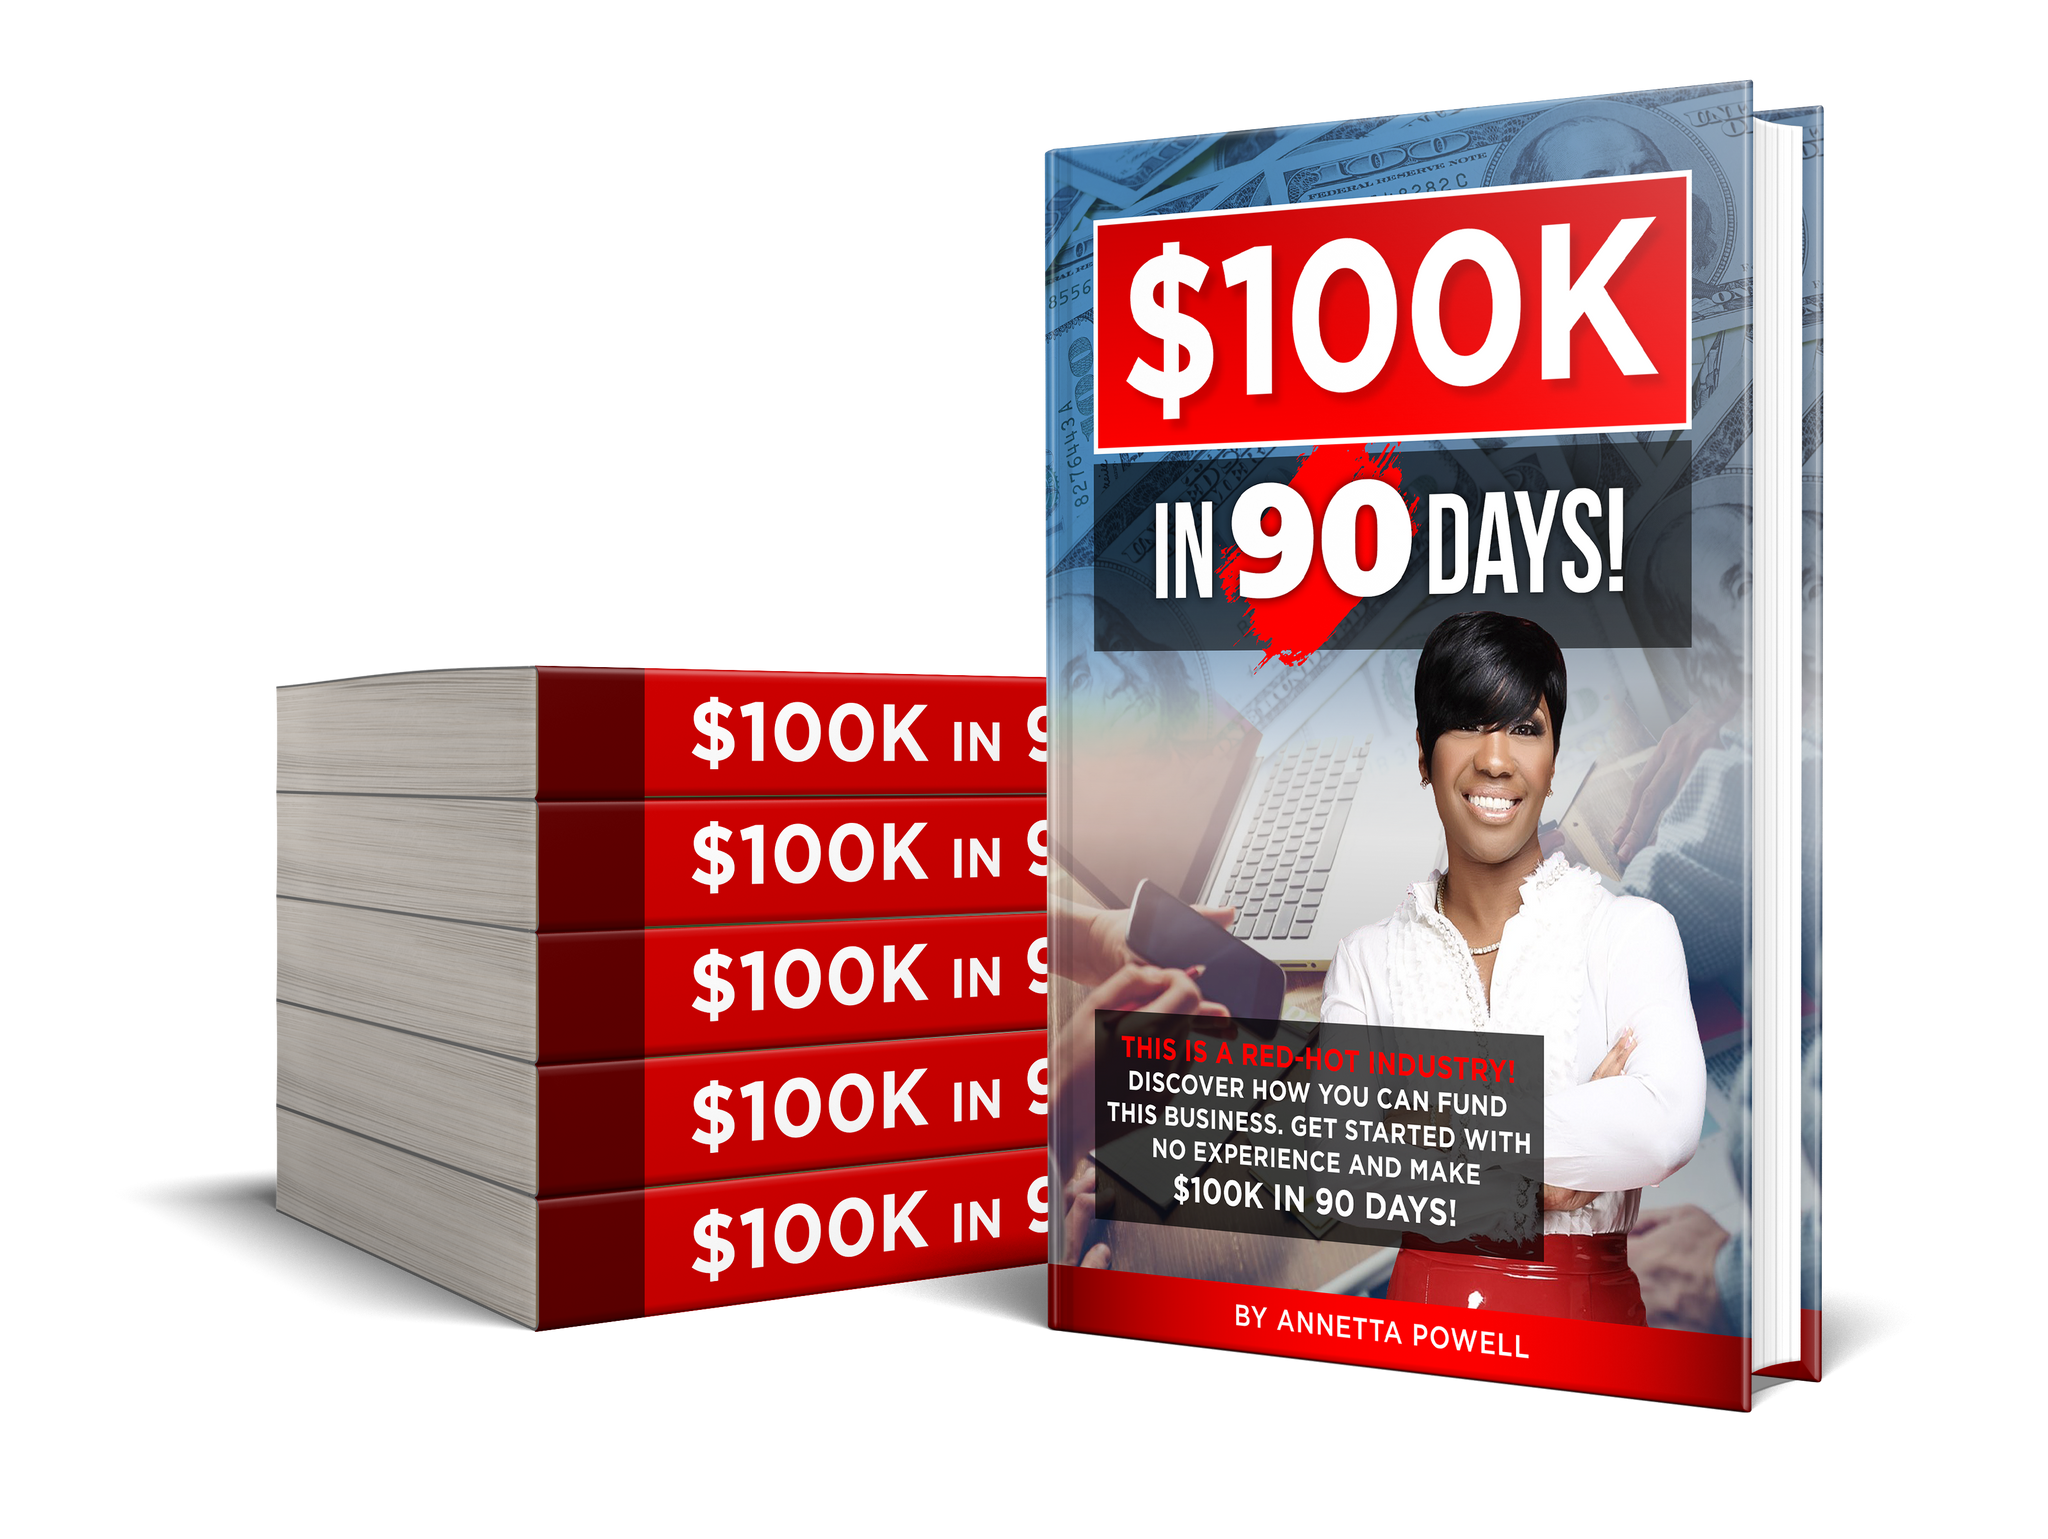 LEARN HOW TO MAKE $100K IN 90 DAYS IN THE TAX GAME - E-BOOK VERSION